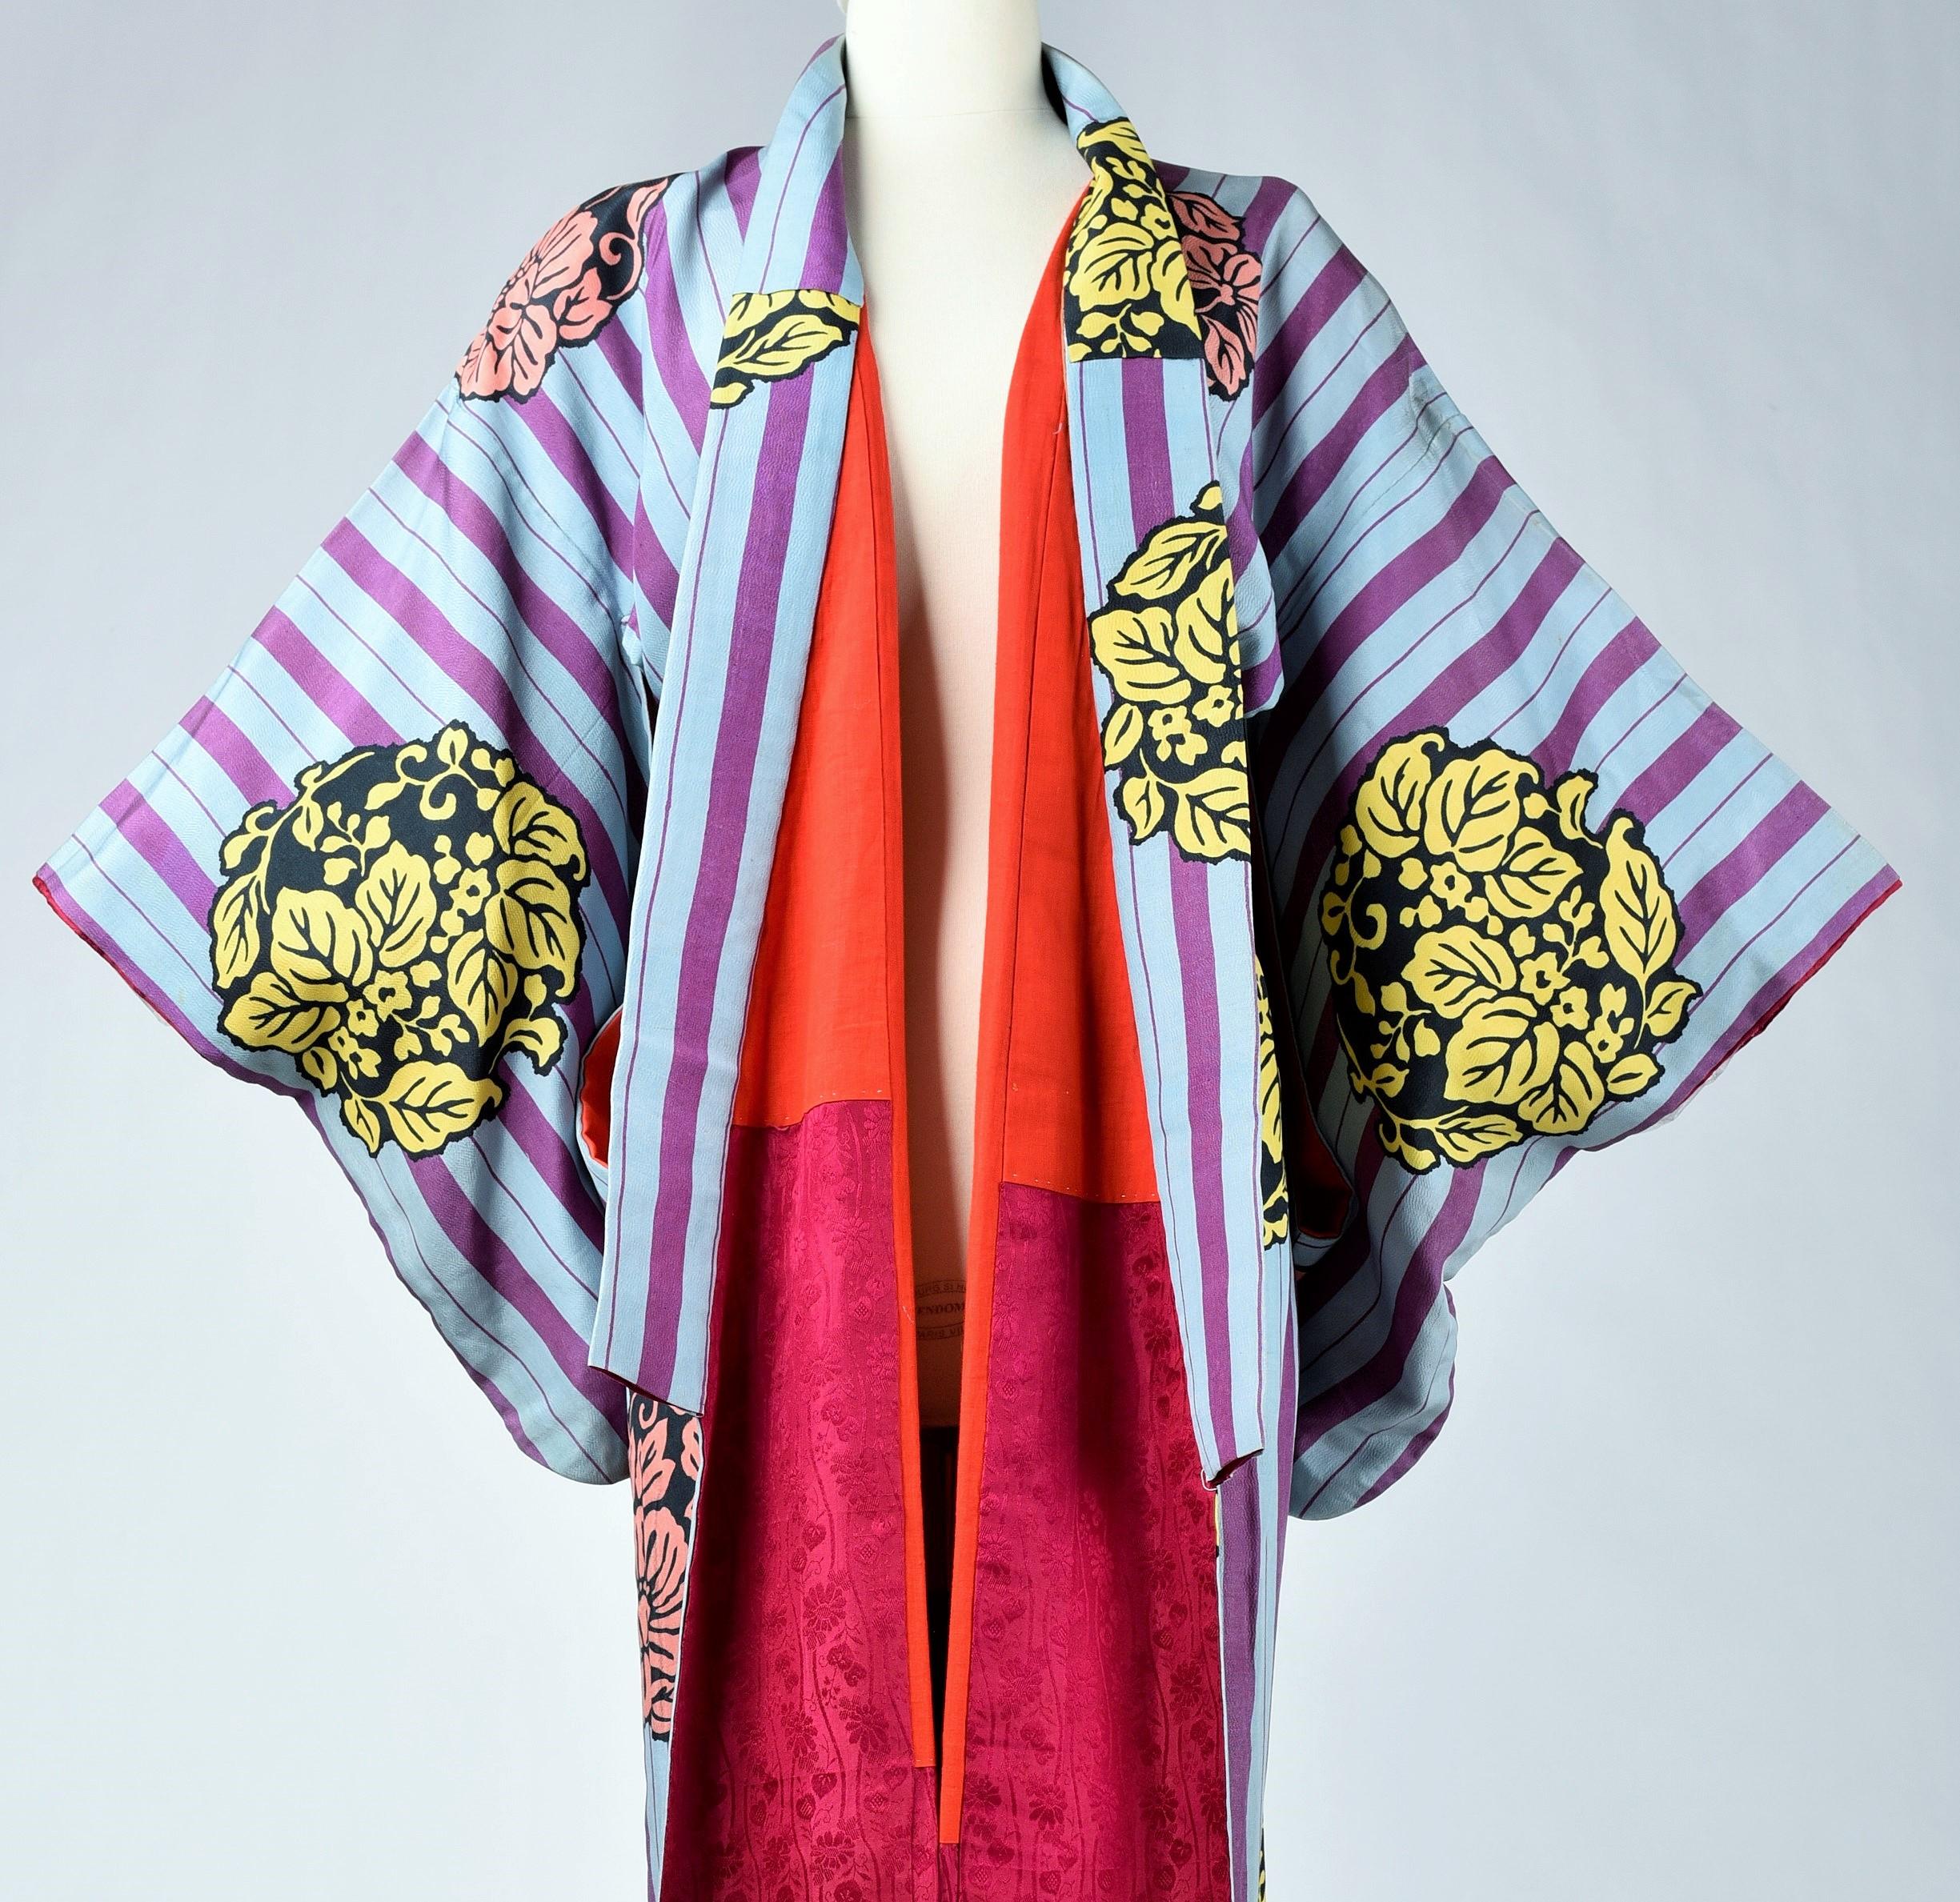 Circa 1930-1940

Japan

Kimono for evening or indoor use with long sleeves called Furisode and dating from the Art Deco period in Japan. Meisen printed silk crepe with large blue and purple stripes dotted with large yellow, salmon and black floral